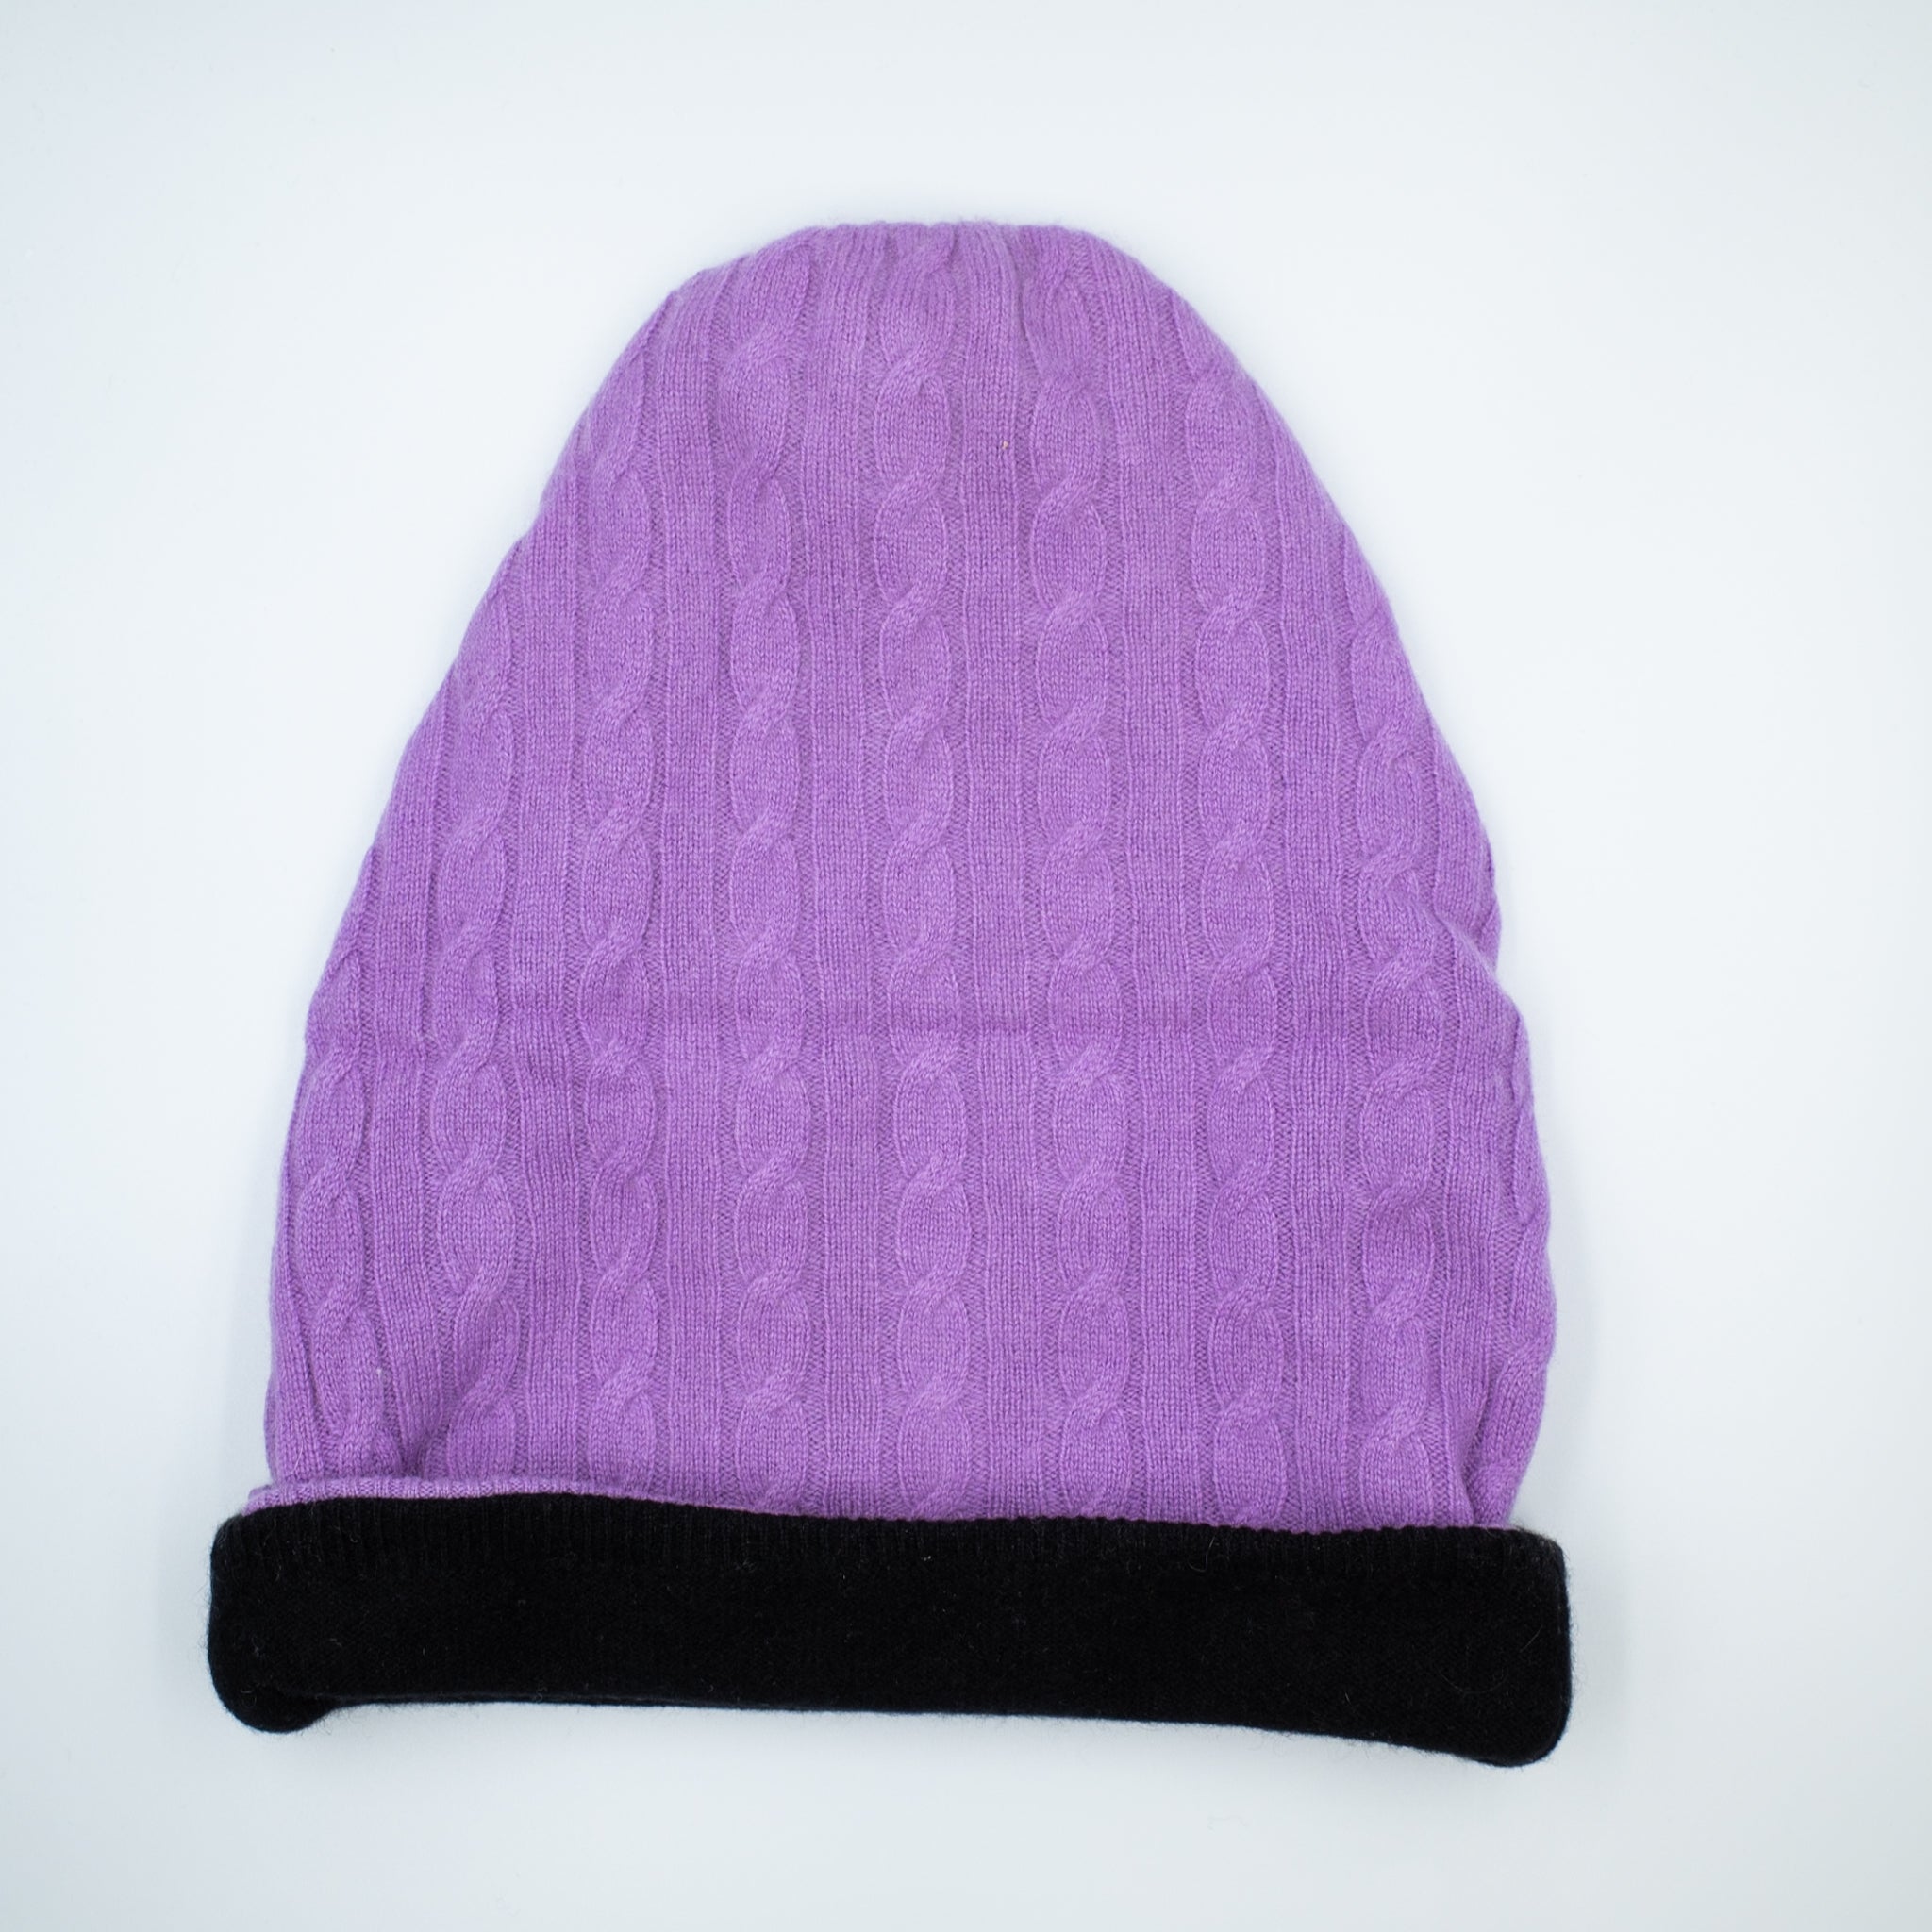 Lavender Cable and Black Reversible Slouchy Beanie Hat